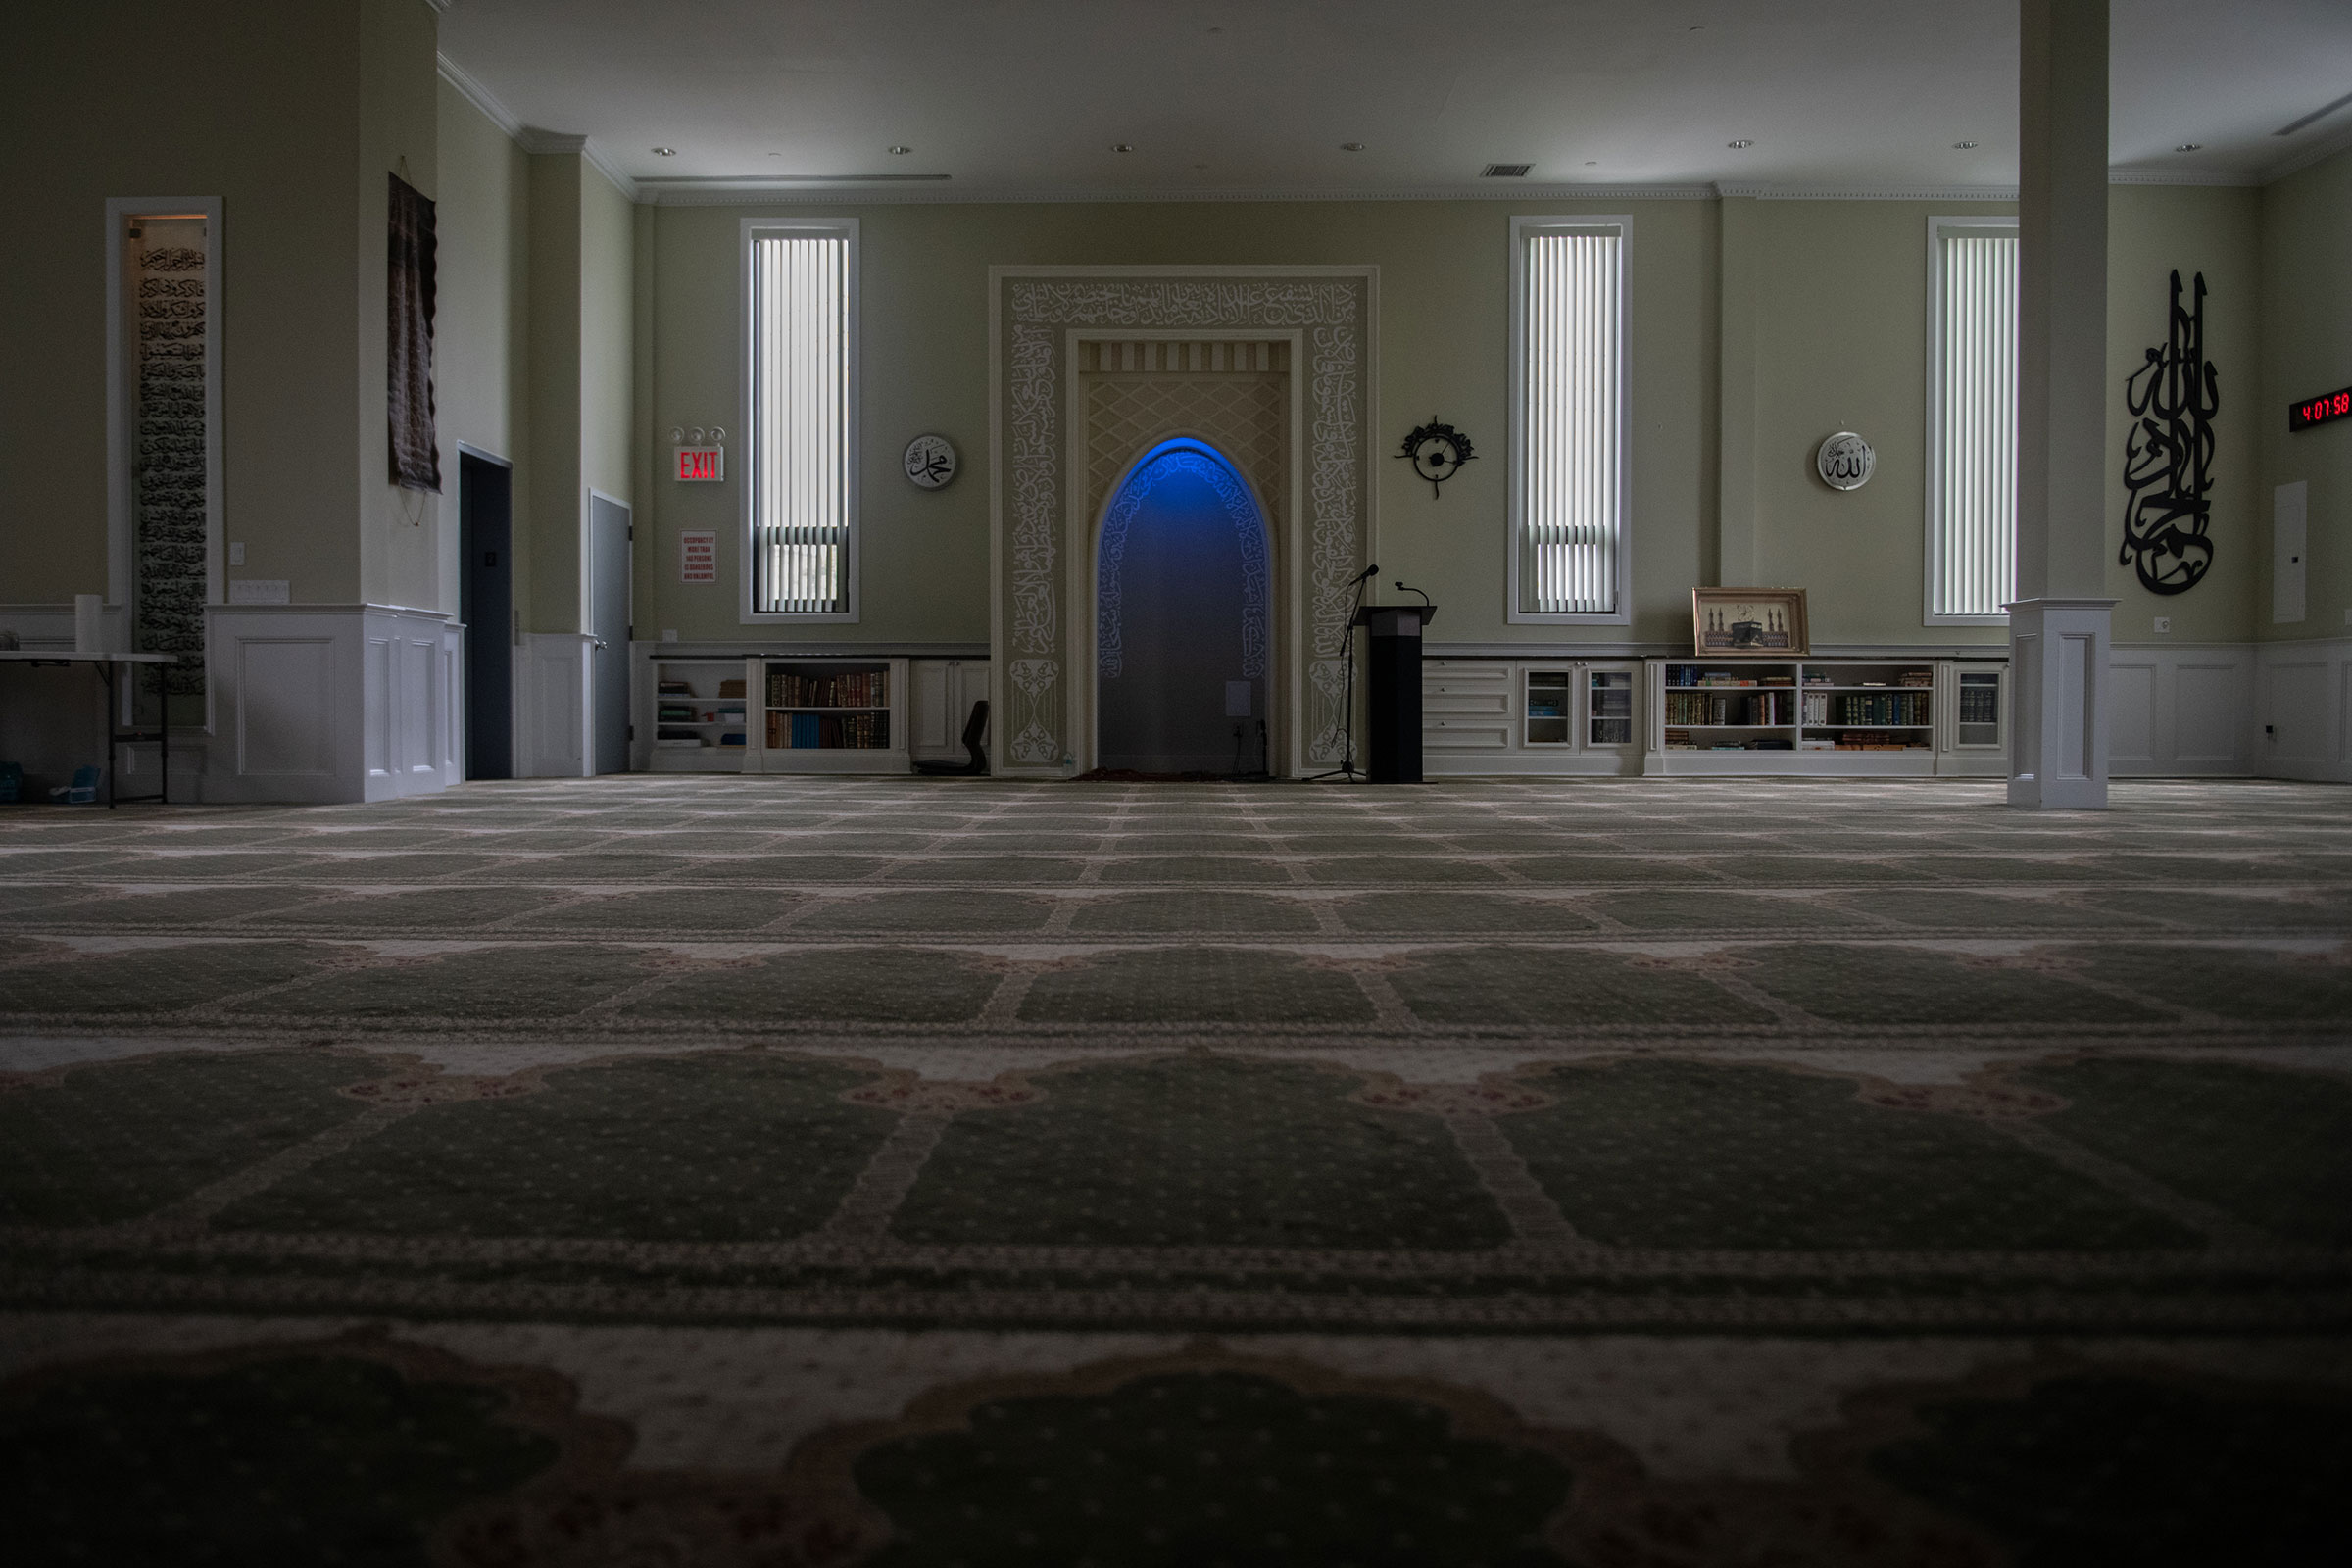 Dar-al Taqwa Islamic Center in Queens, NY on May 8, 2022. (Kholood Eid for TIME)